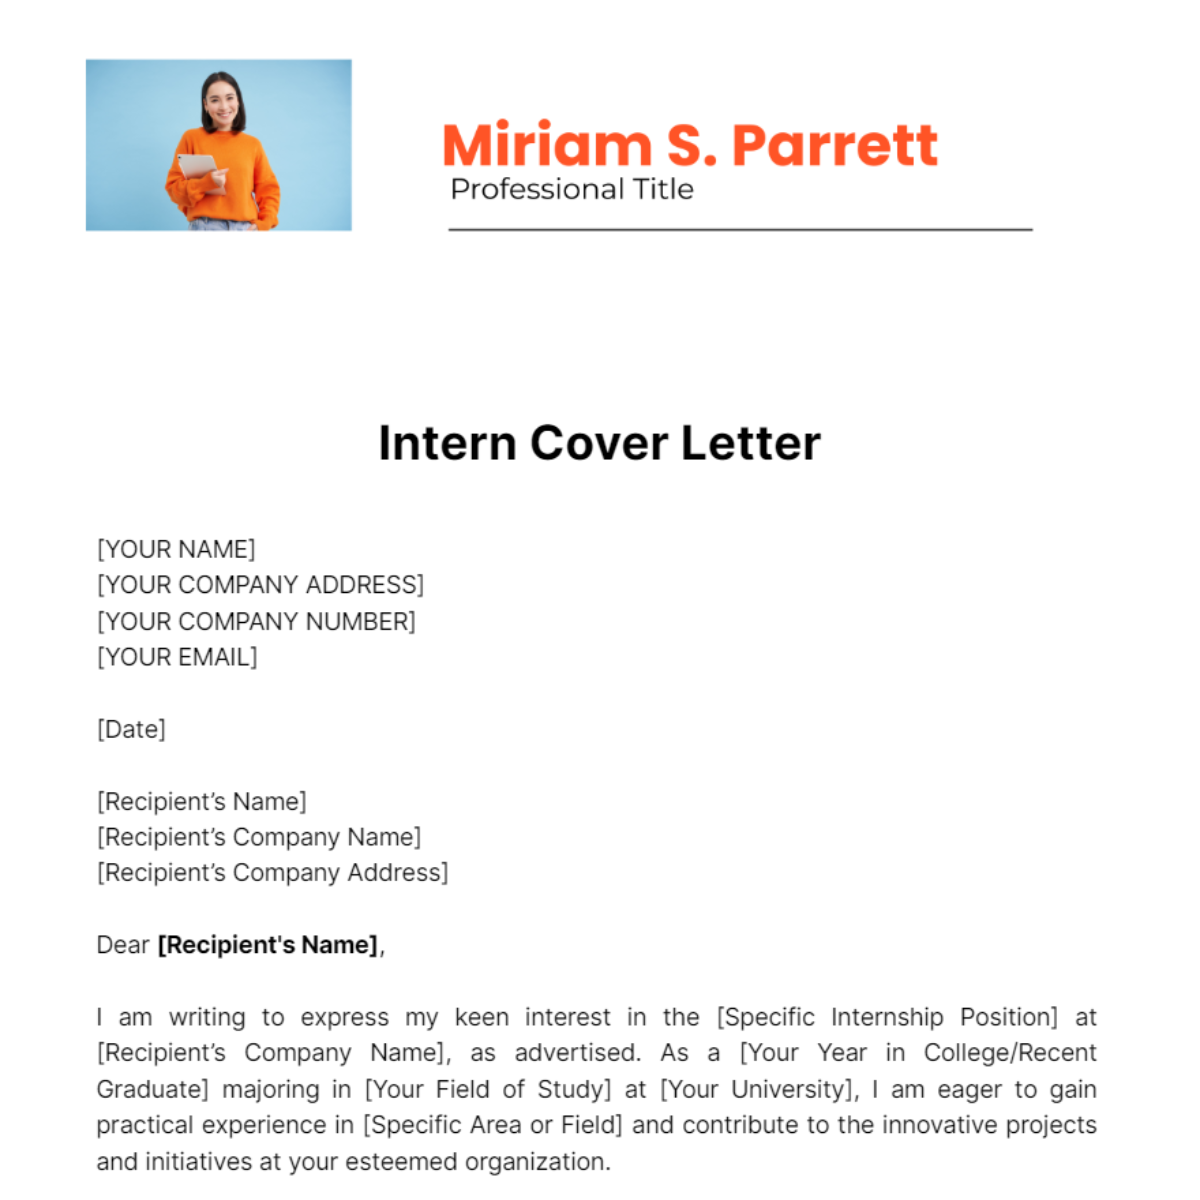 Intern Cover Letter Template